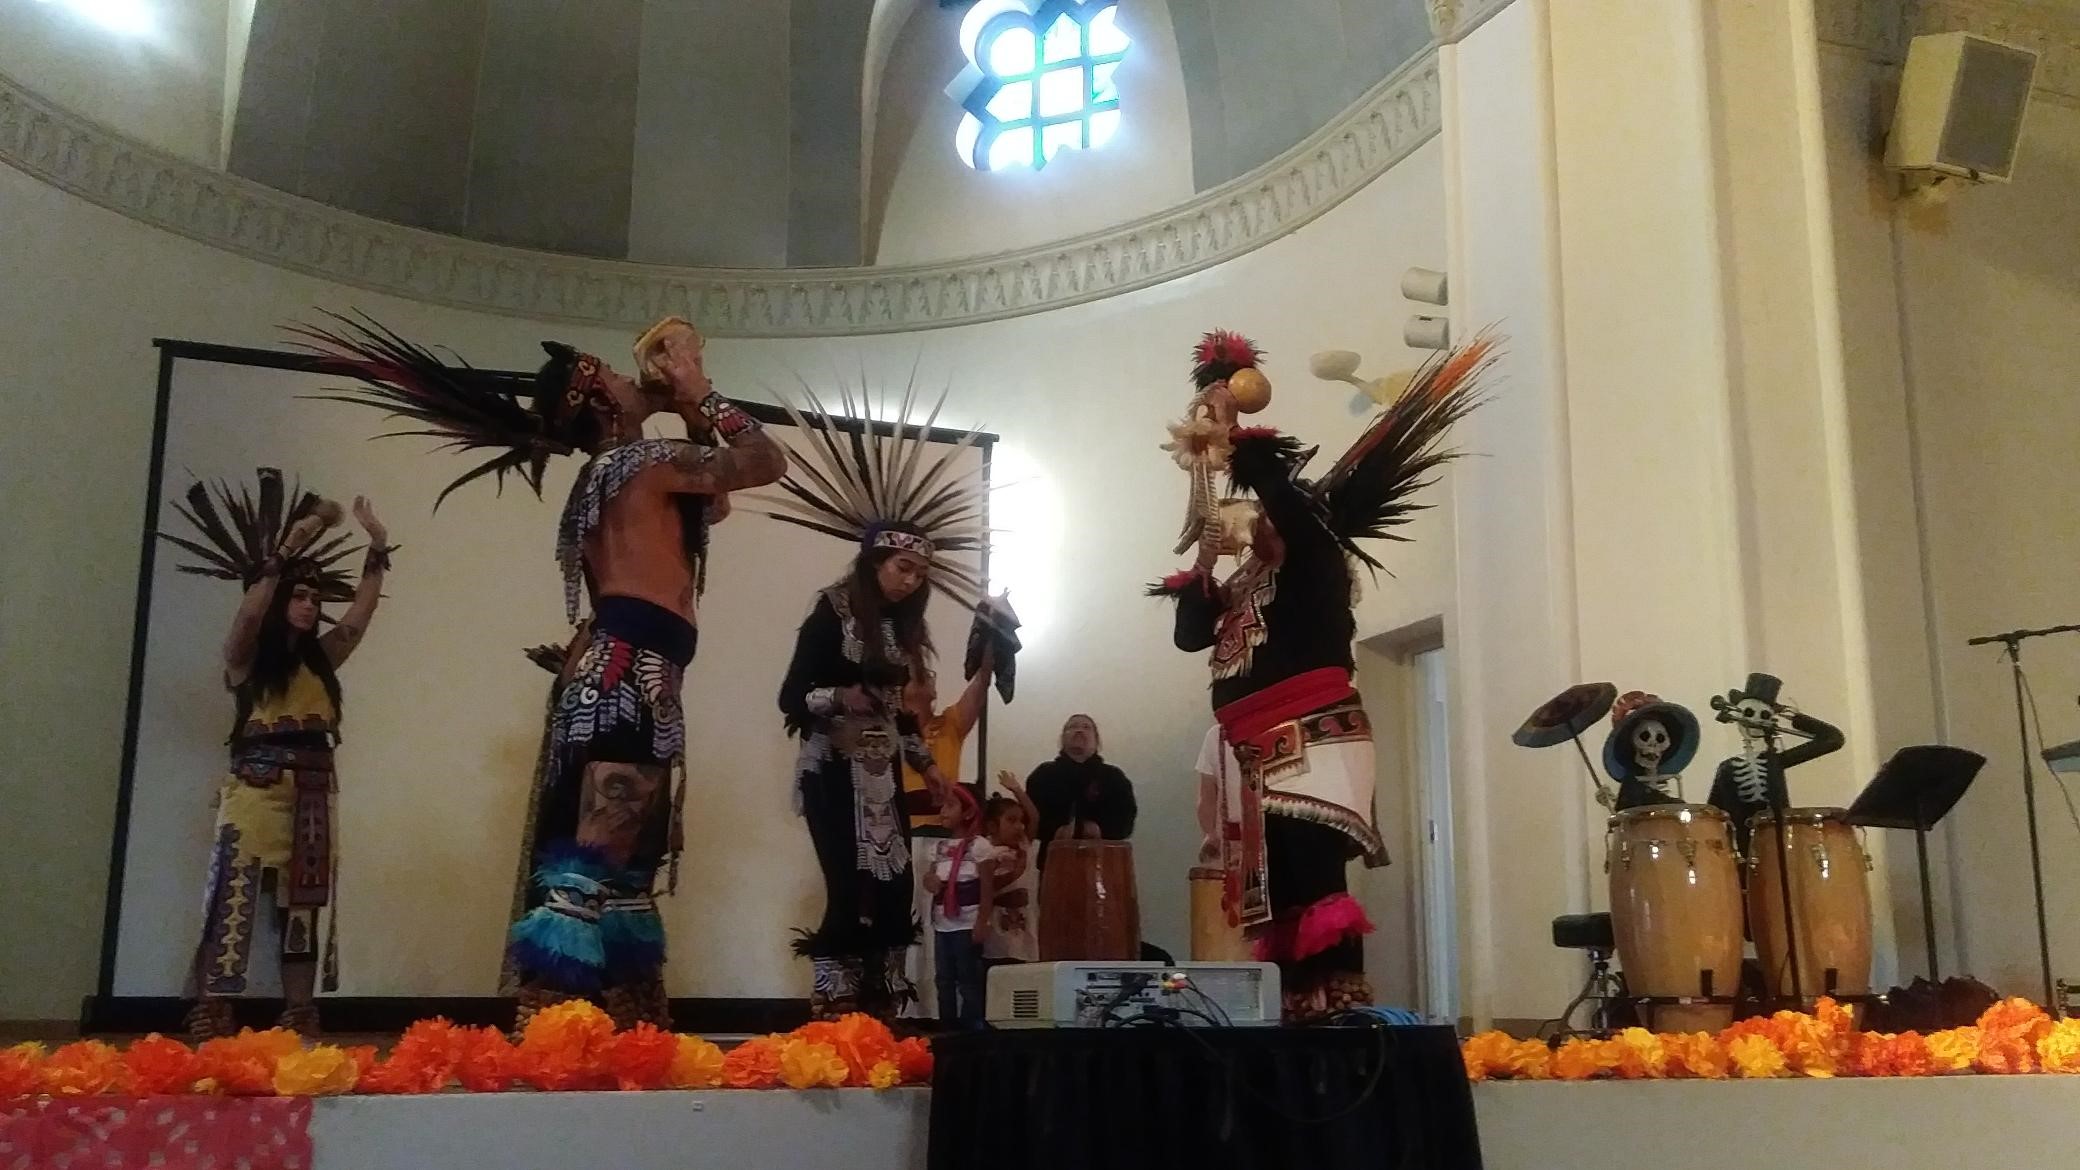 Huitzilopotchli Aztec Dancers in traditional wear, feathers in their hair and bells around their ankles. Drummers in back.